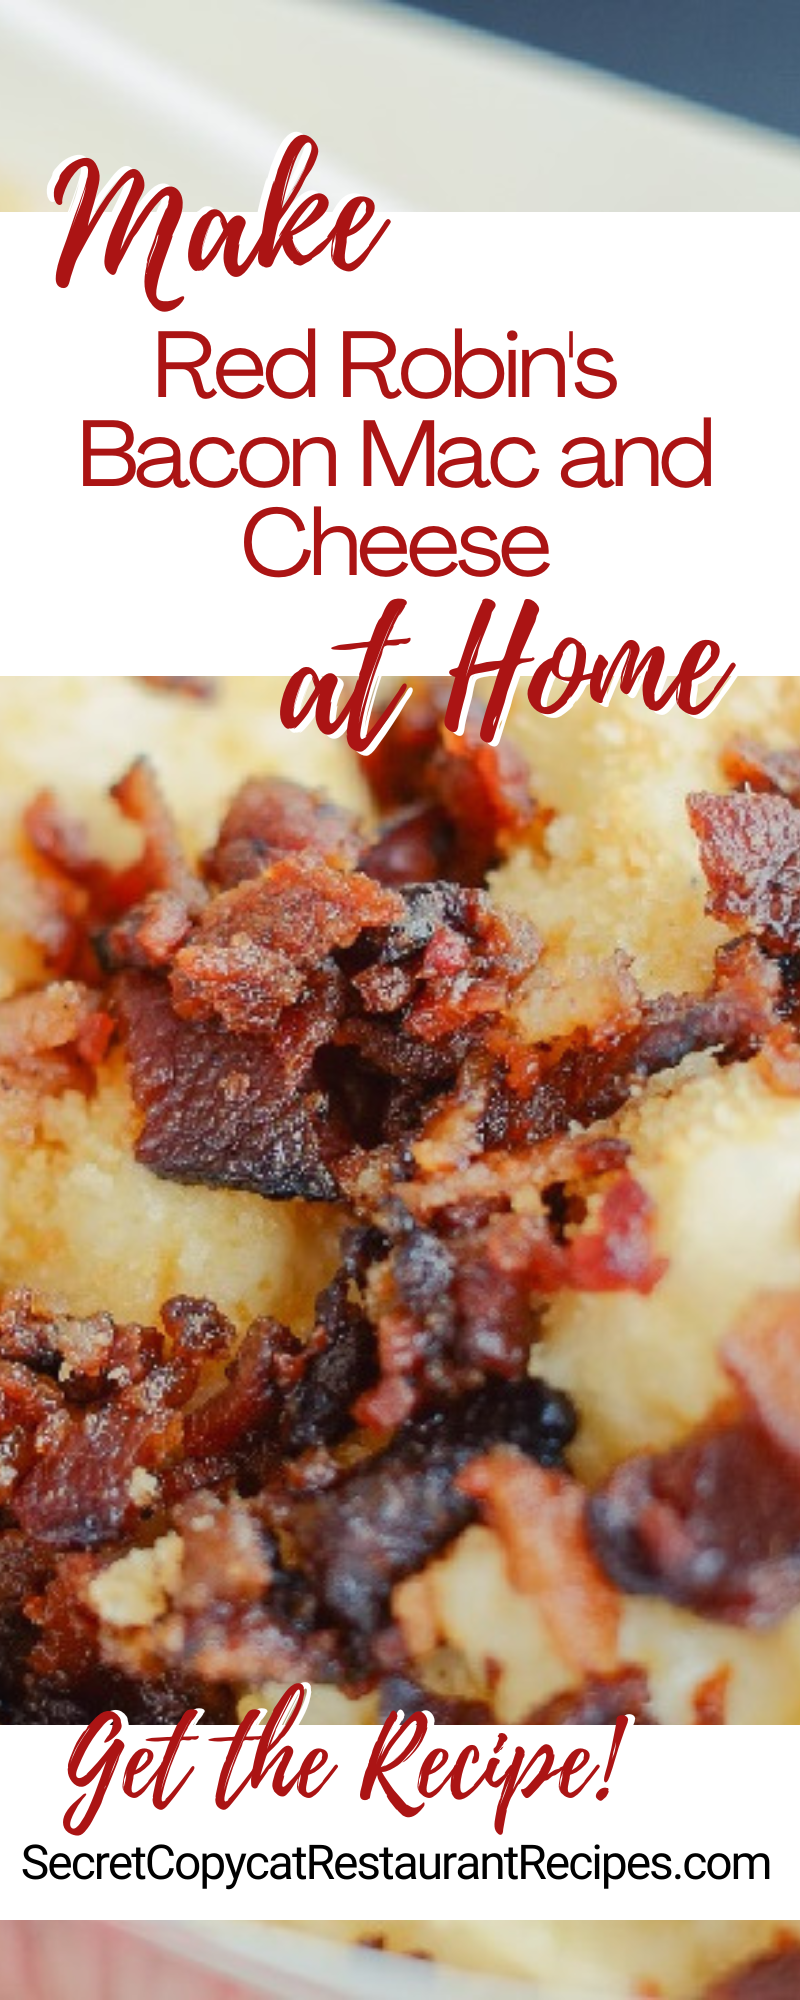 Red Robin Bacon Mac and Cheese Recipe